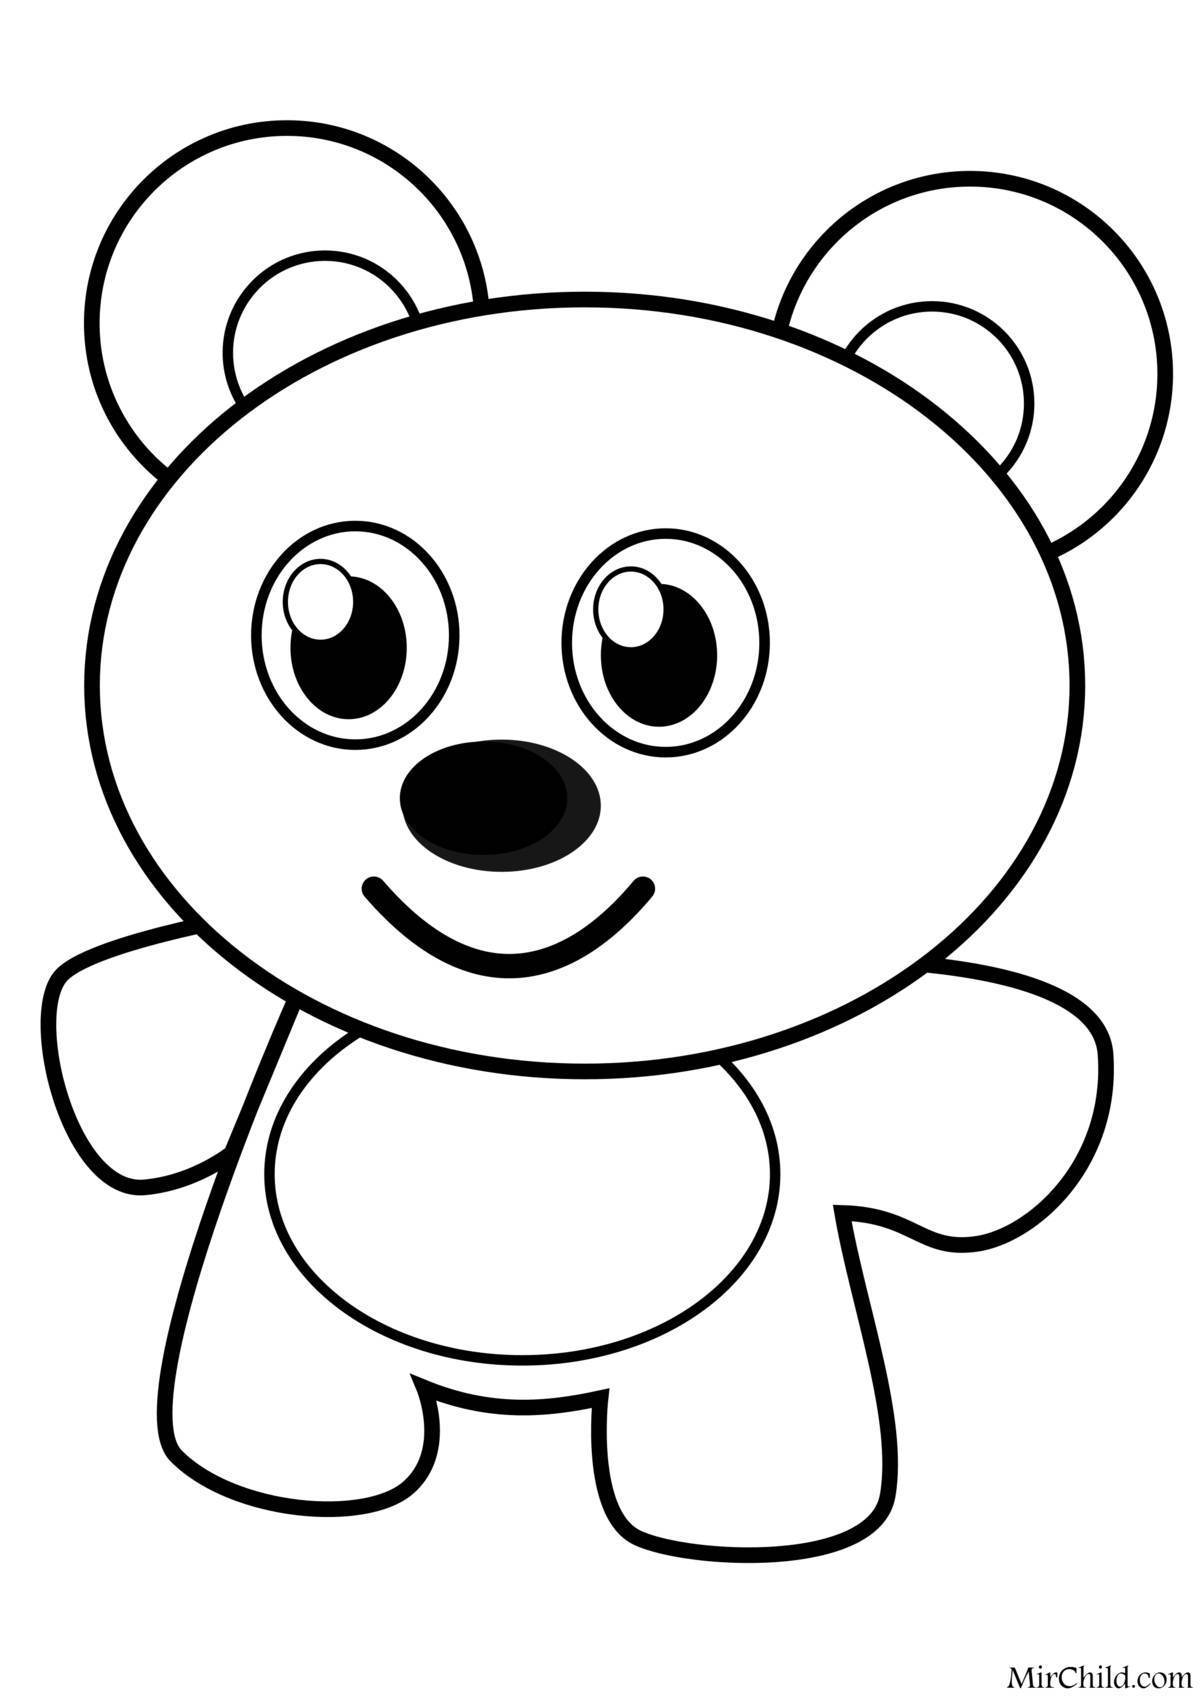 Fancy coloring book for 1 to 2 year olds